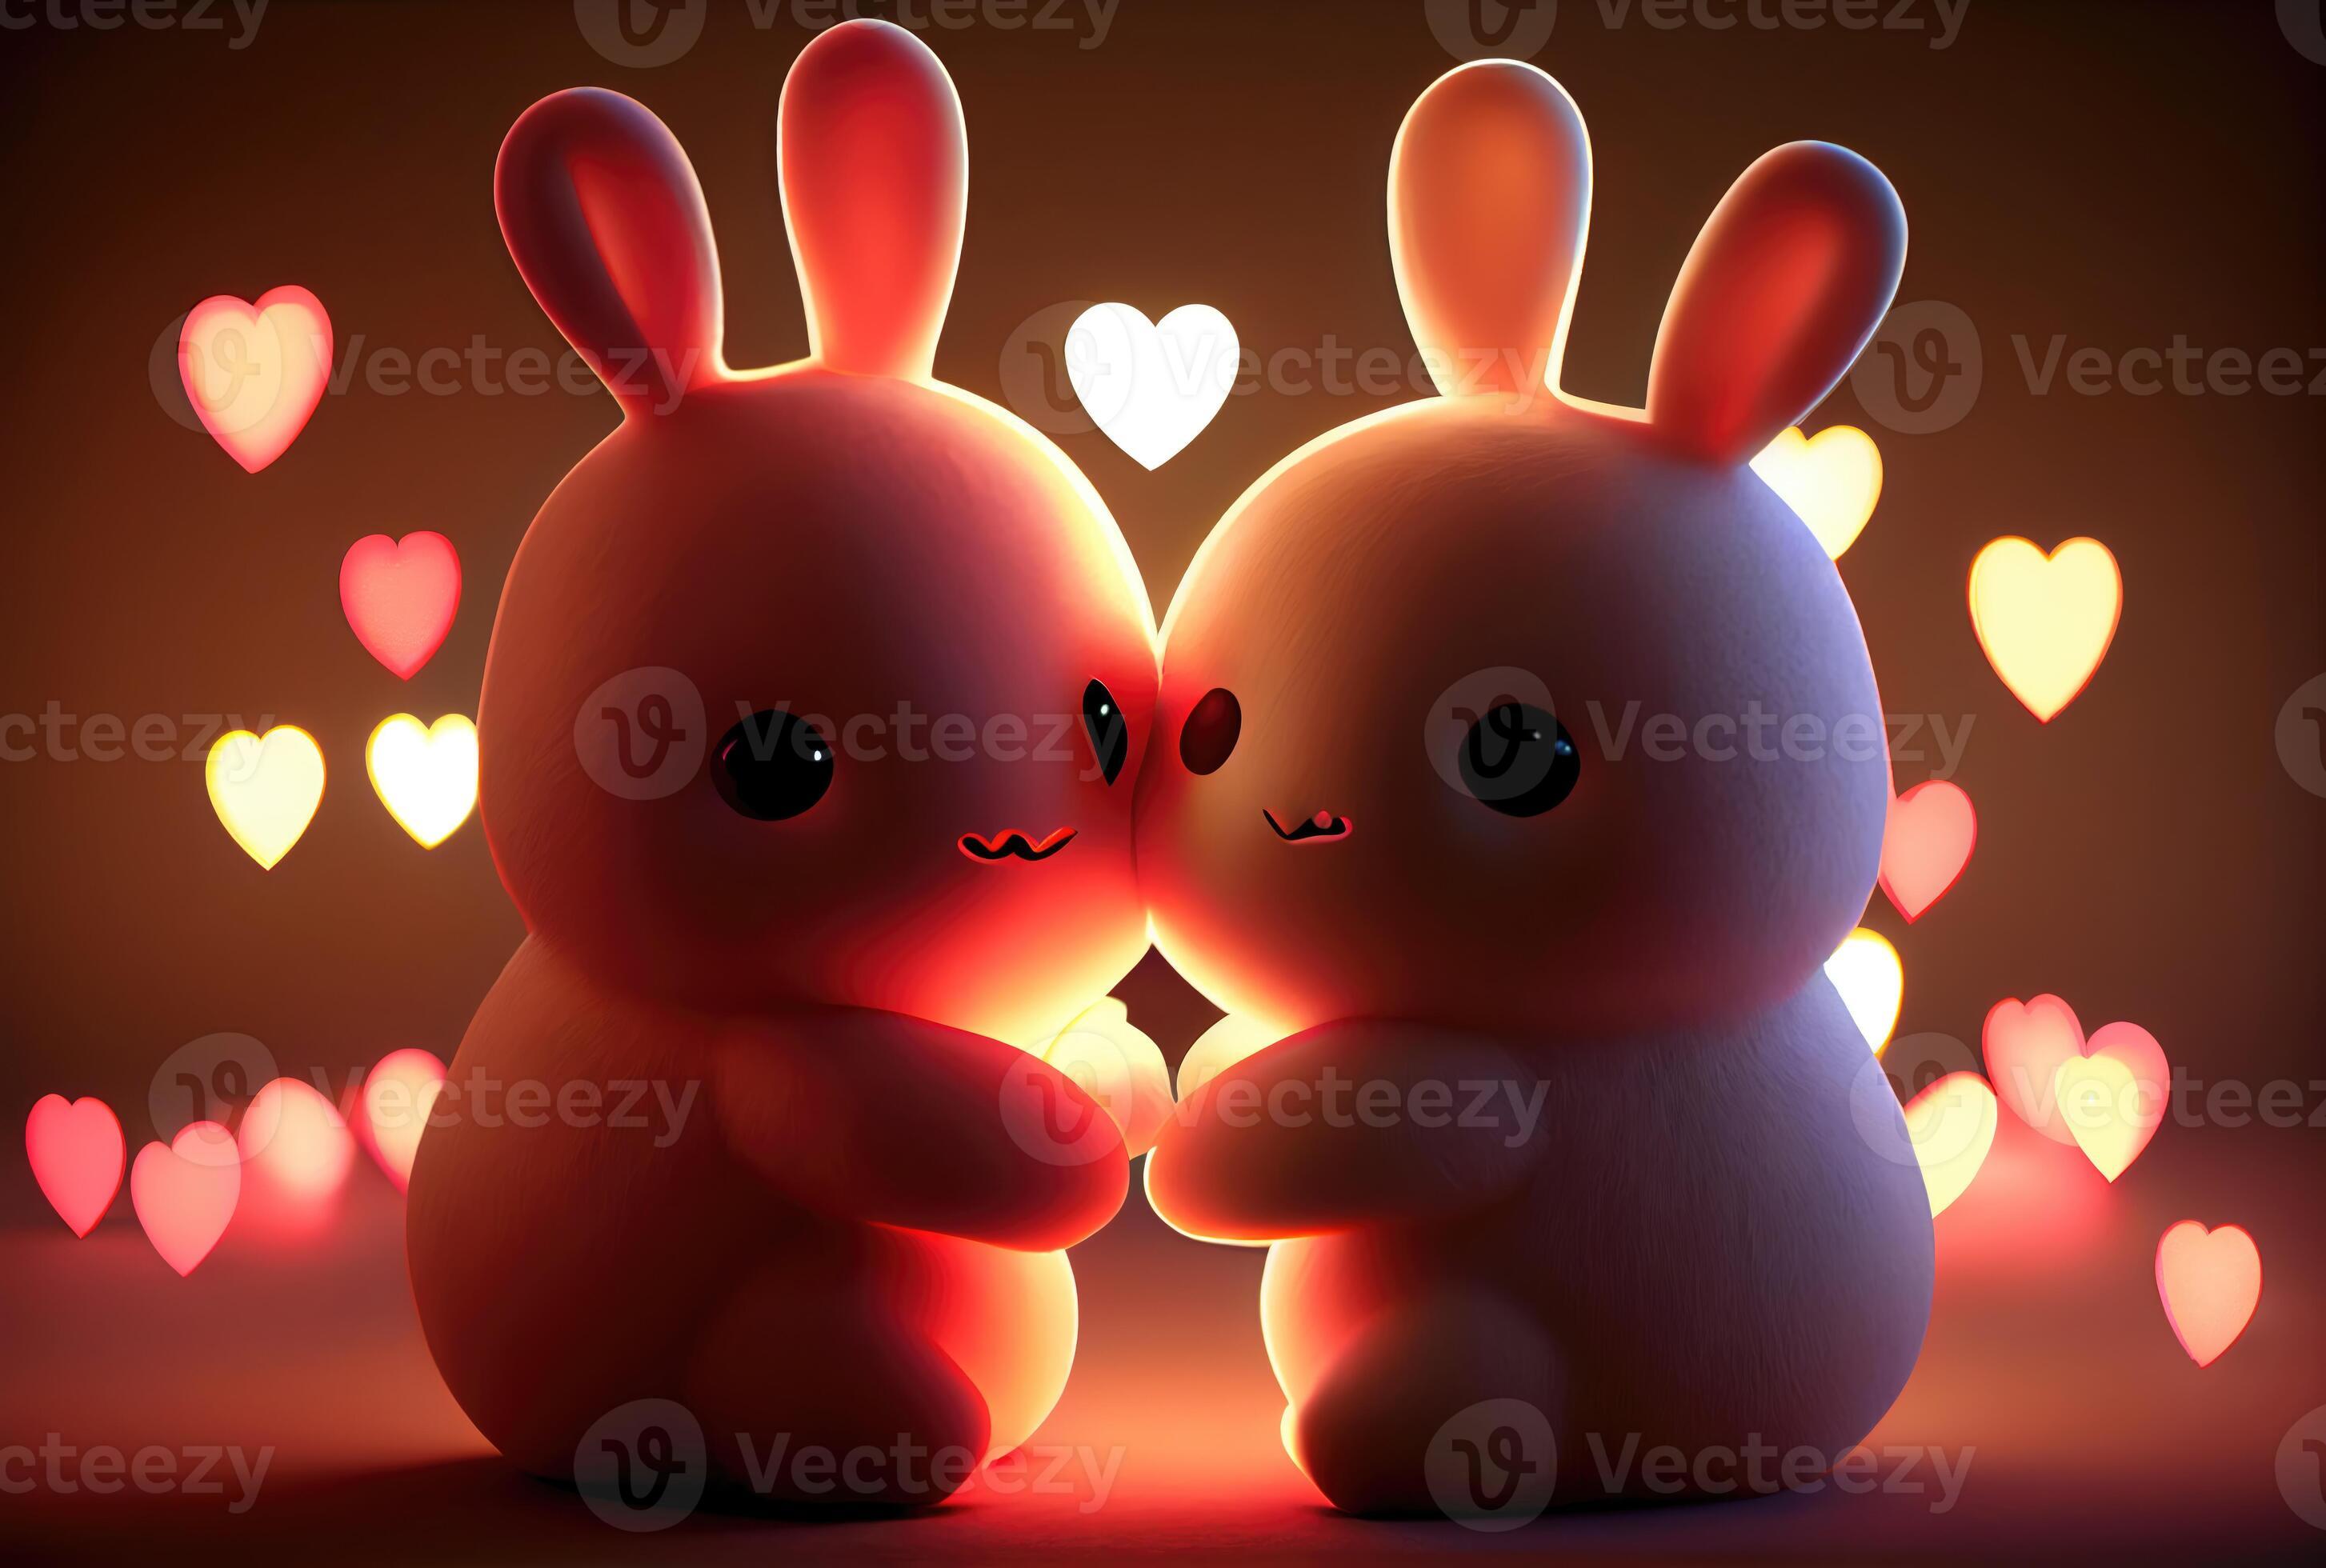 Cute bunnies as happy lovers couple with white... - Stock Photo [61276307]  - PIXTA